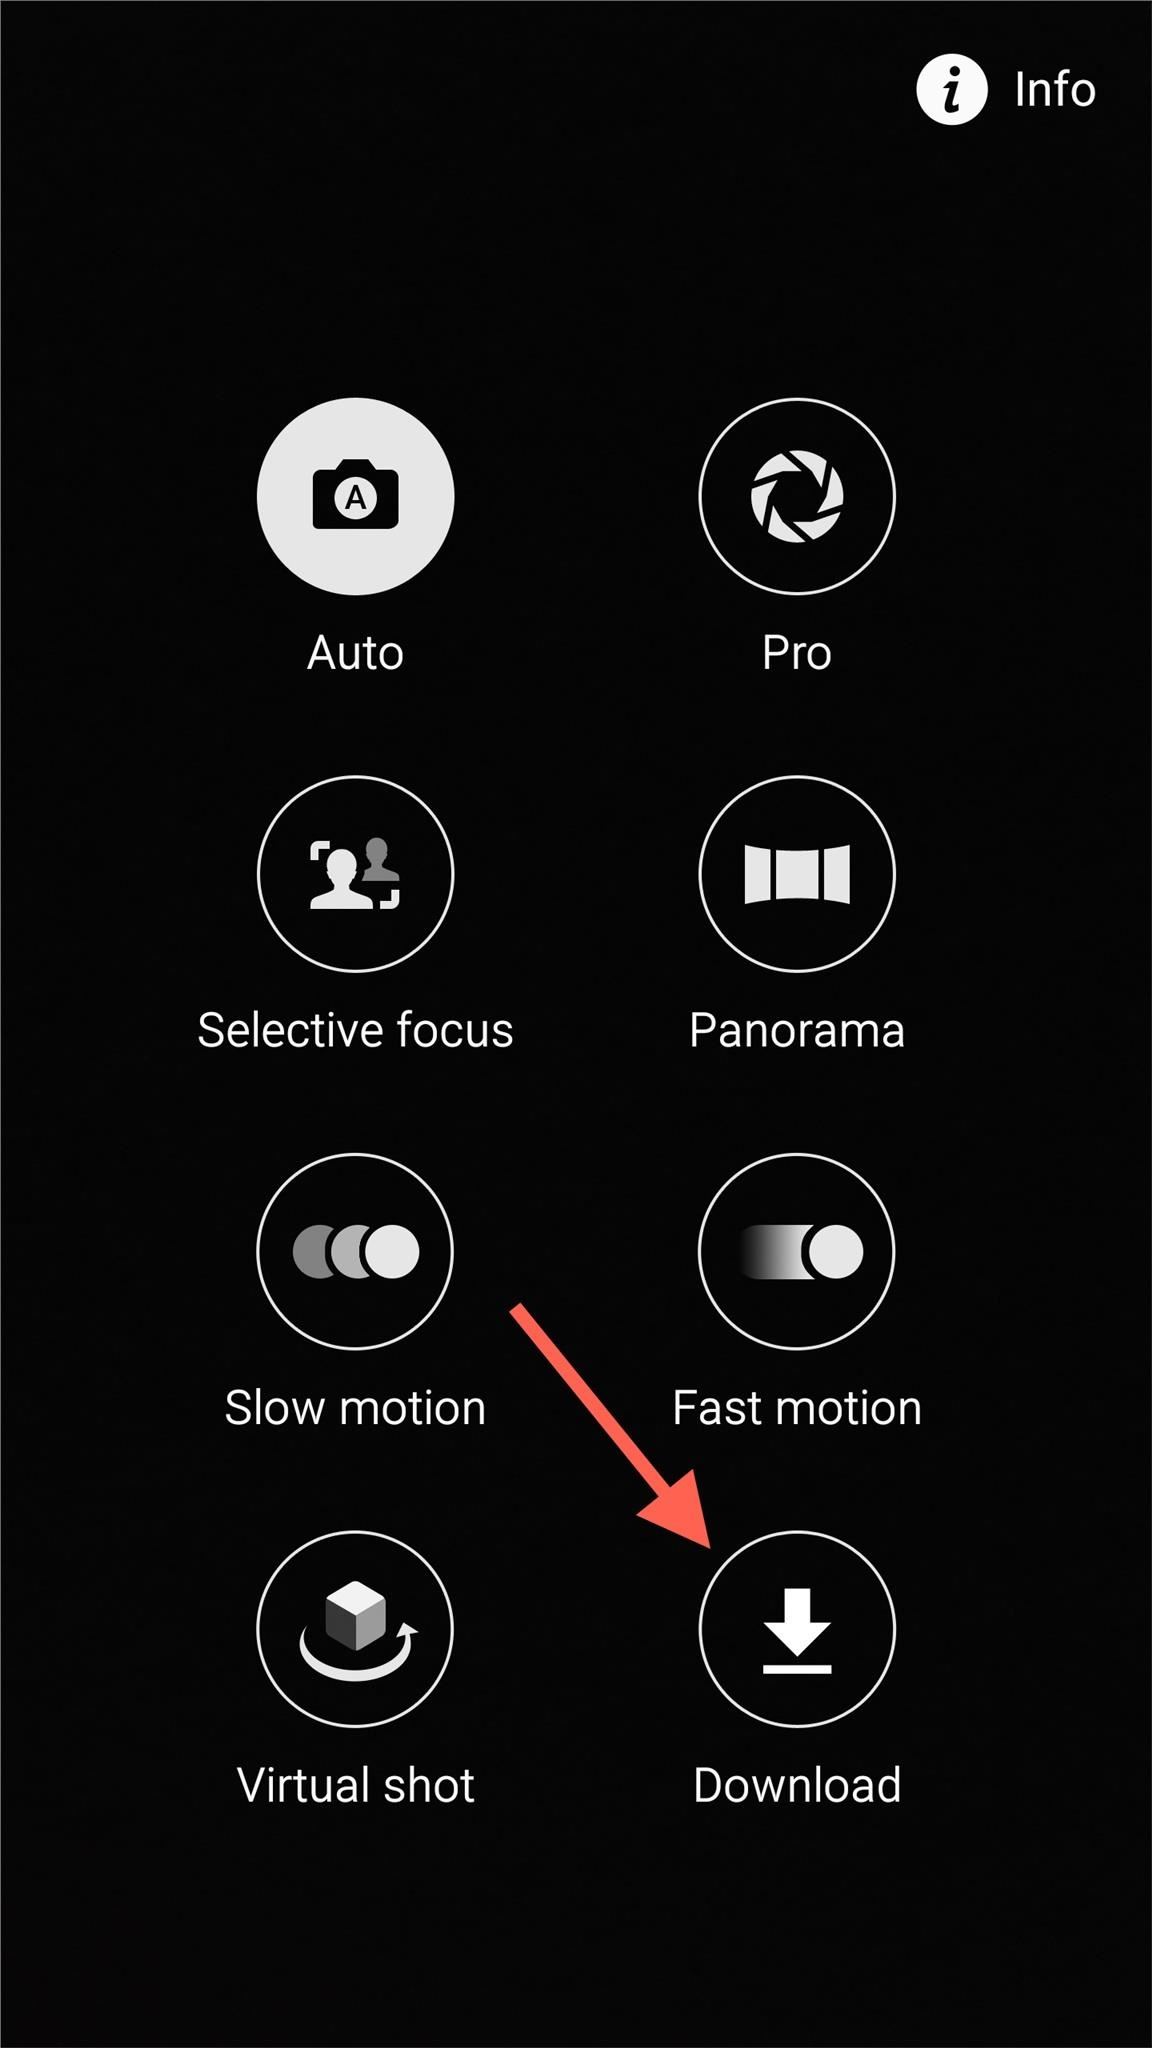 How to Download Additional Camera Modes on a Samsung Galaxy S6